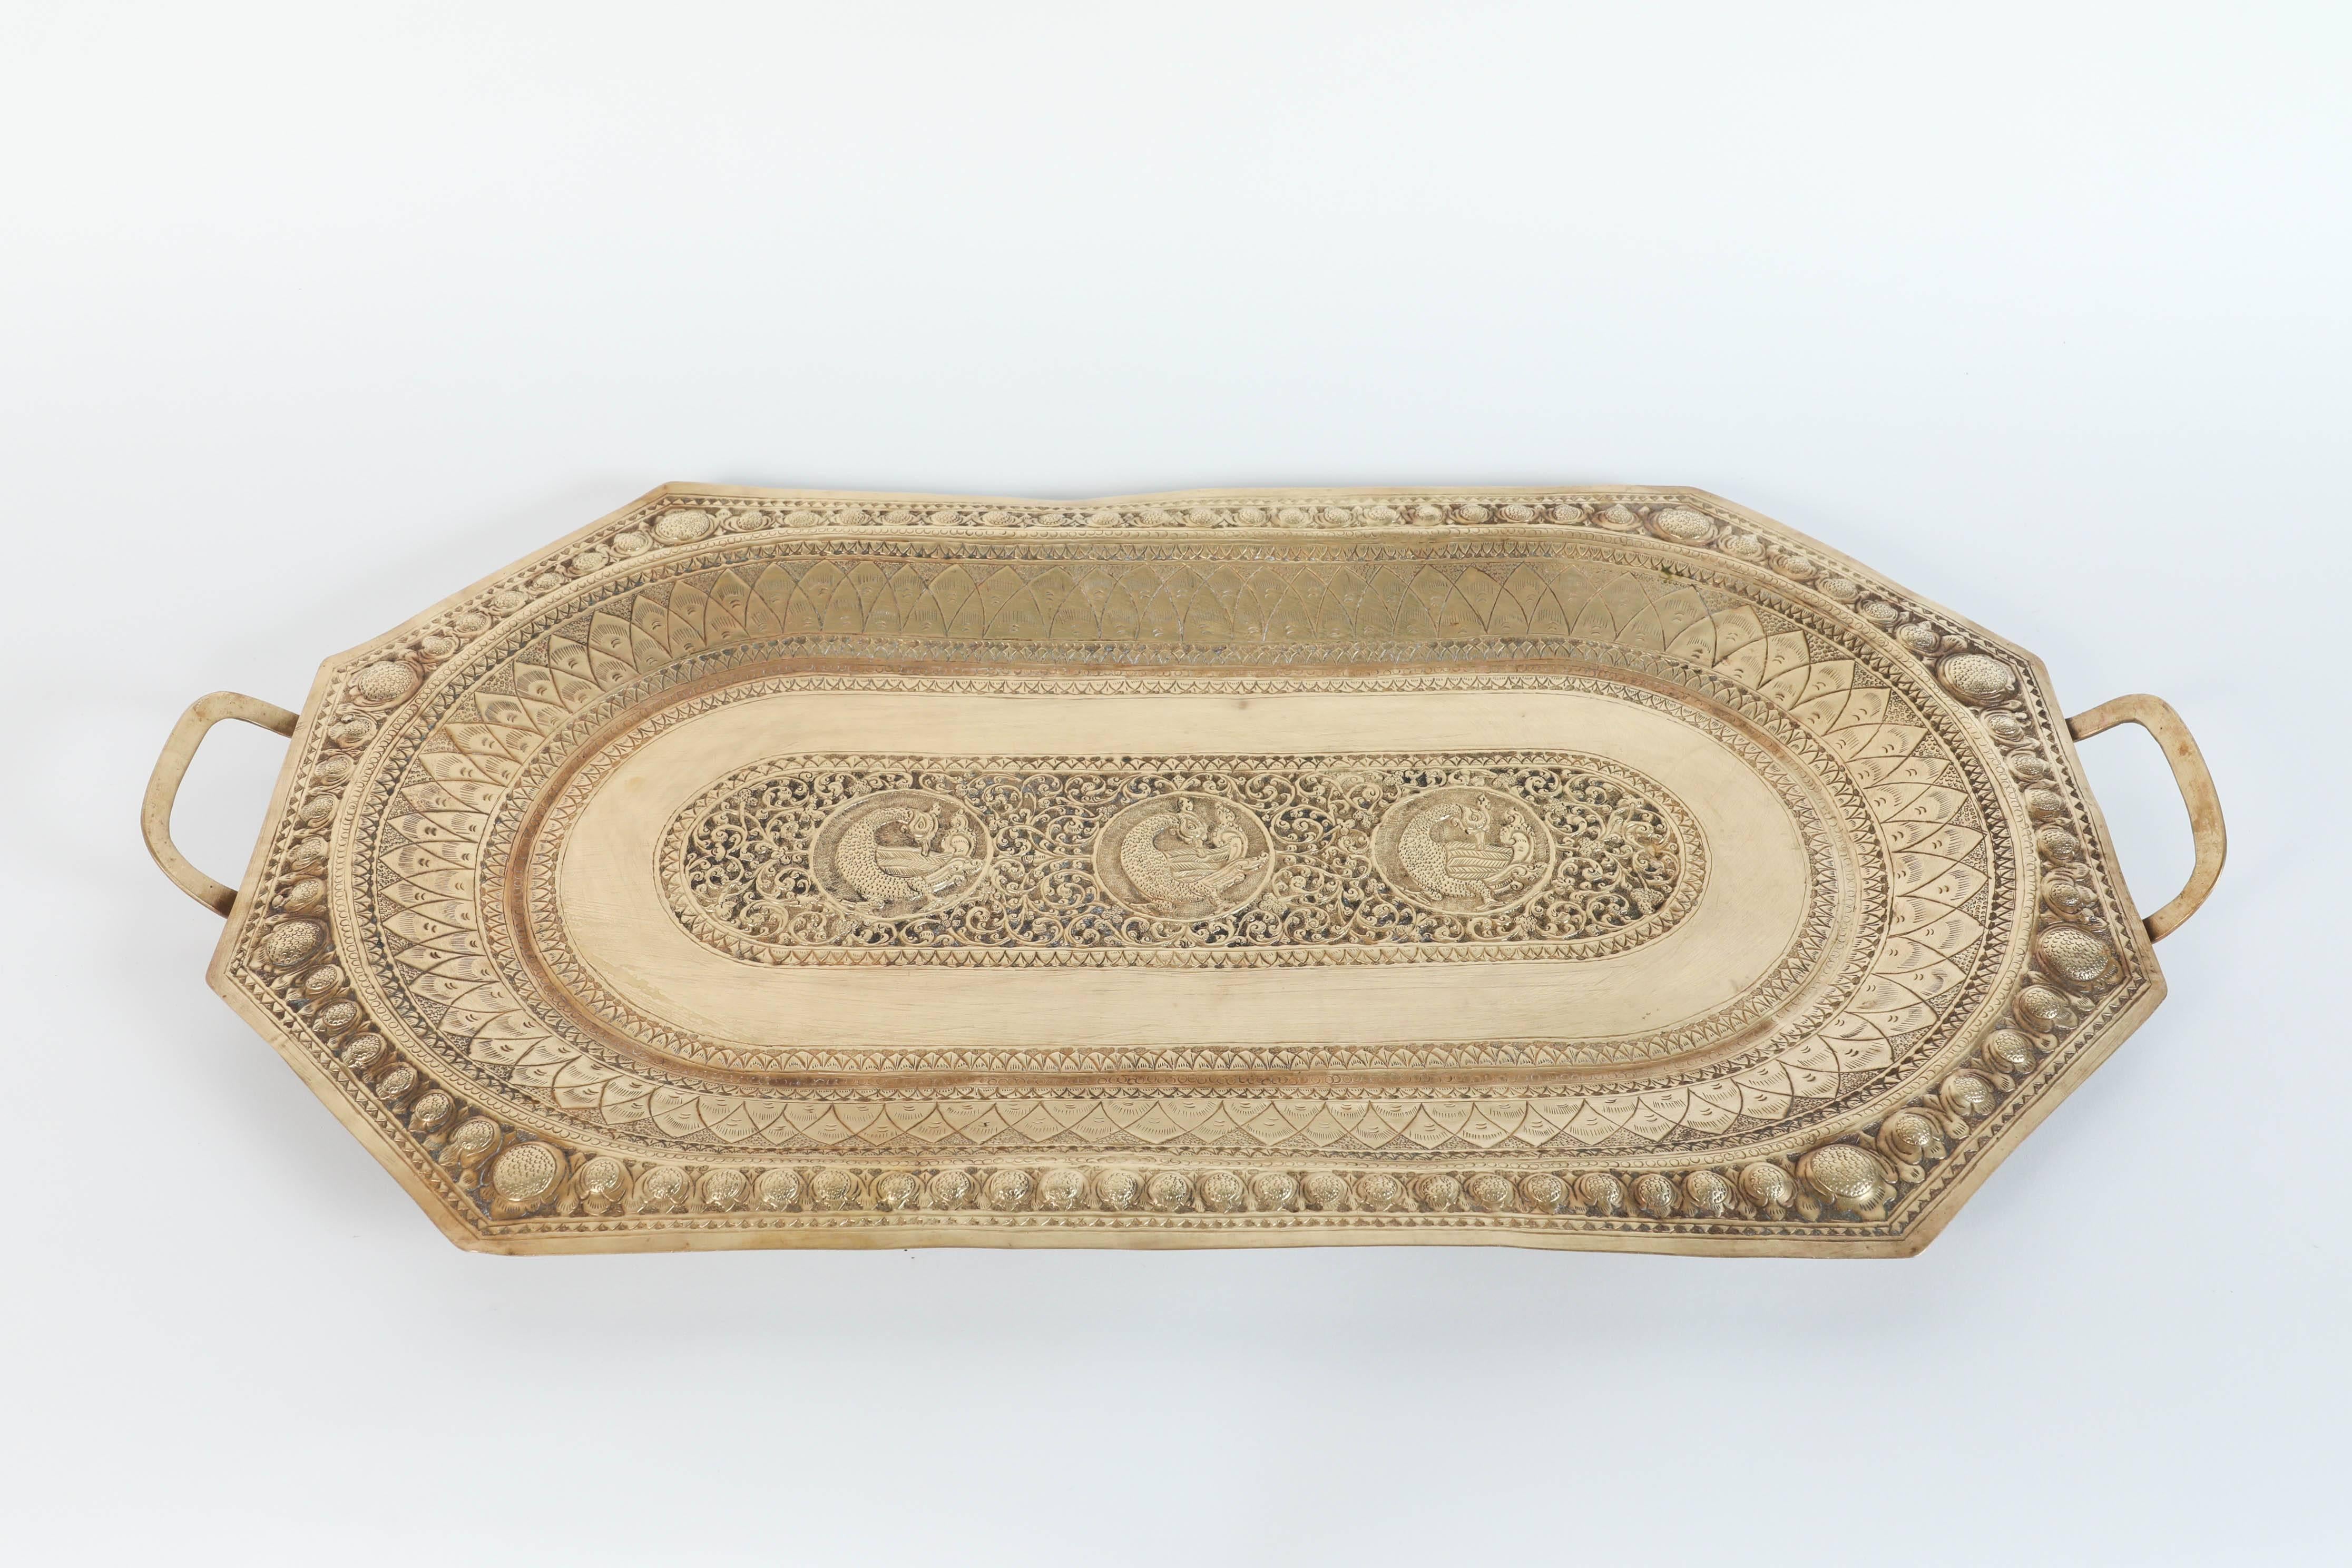 A large Mamluk revival Indo Persian brass charger serving tray with handles.
Large octagonal serving tray platter engraved and finely decorated with peacocks and Moorish geometric designs.
Repoussé floral and foliate motif to the oval center tray